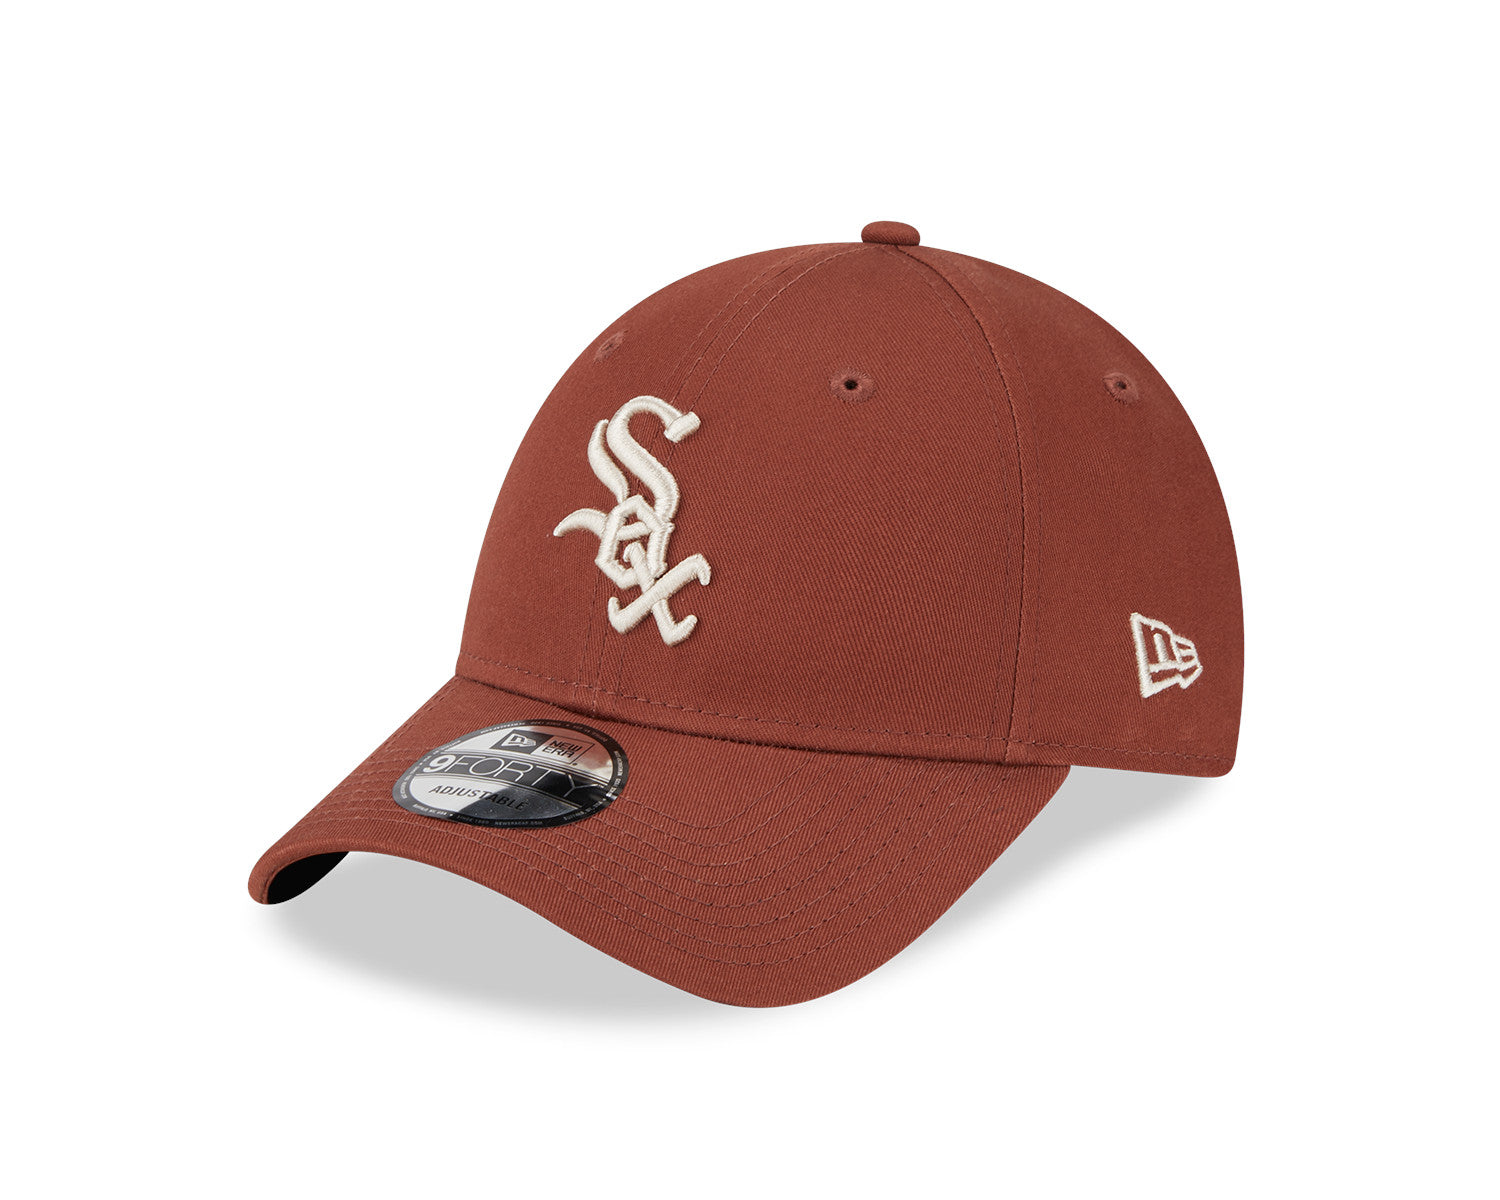 NEW ERA 9FORTY MLB CHICAGO WHITE SOX LEAGUE ESSENTIAL BROWN CAP